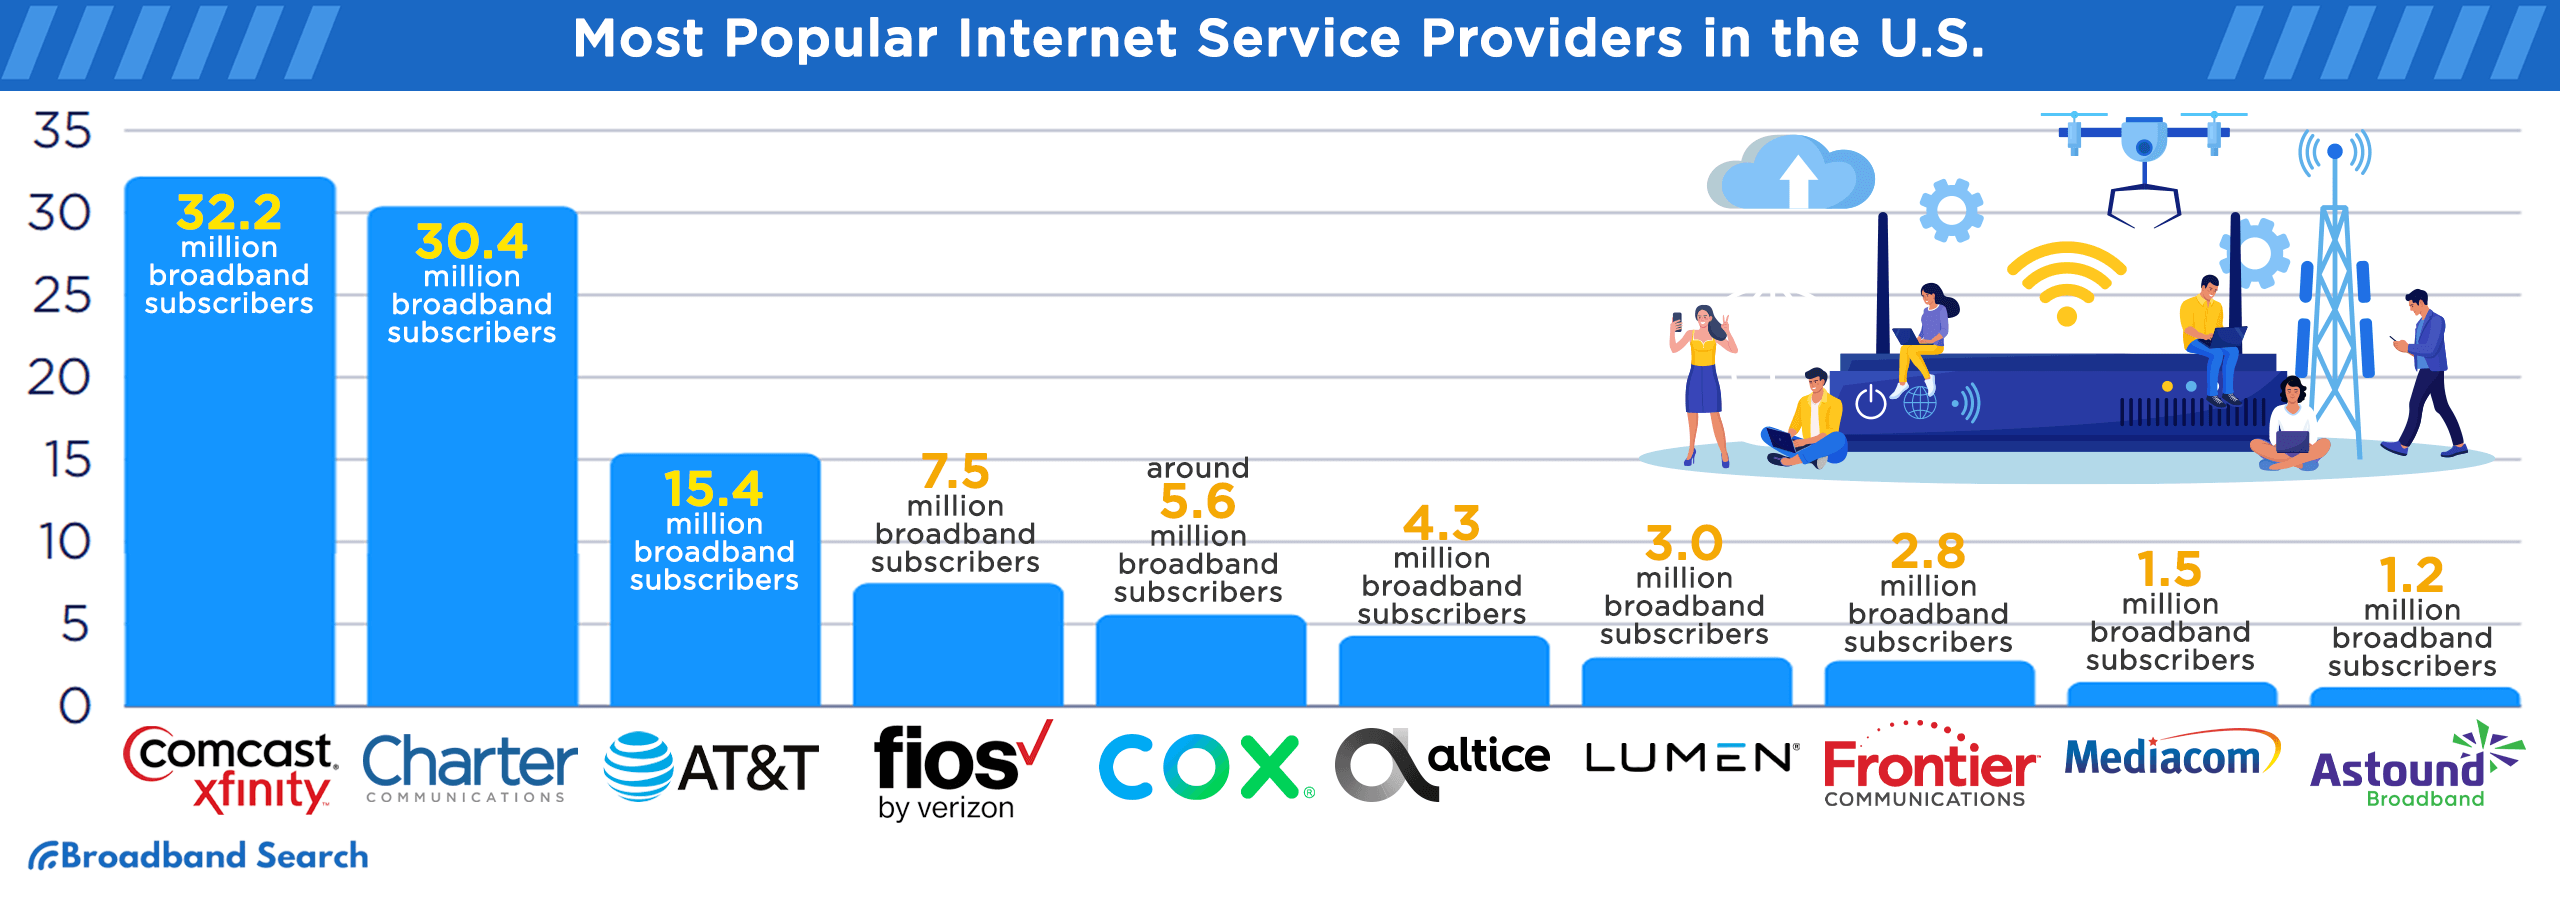 Most popular internet service providers in the U.S.